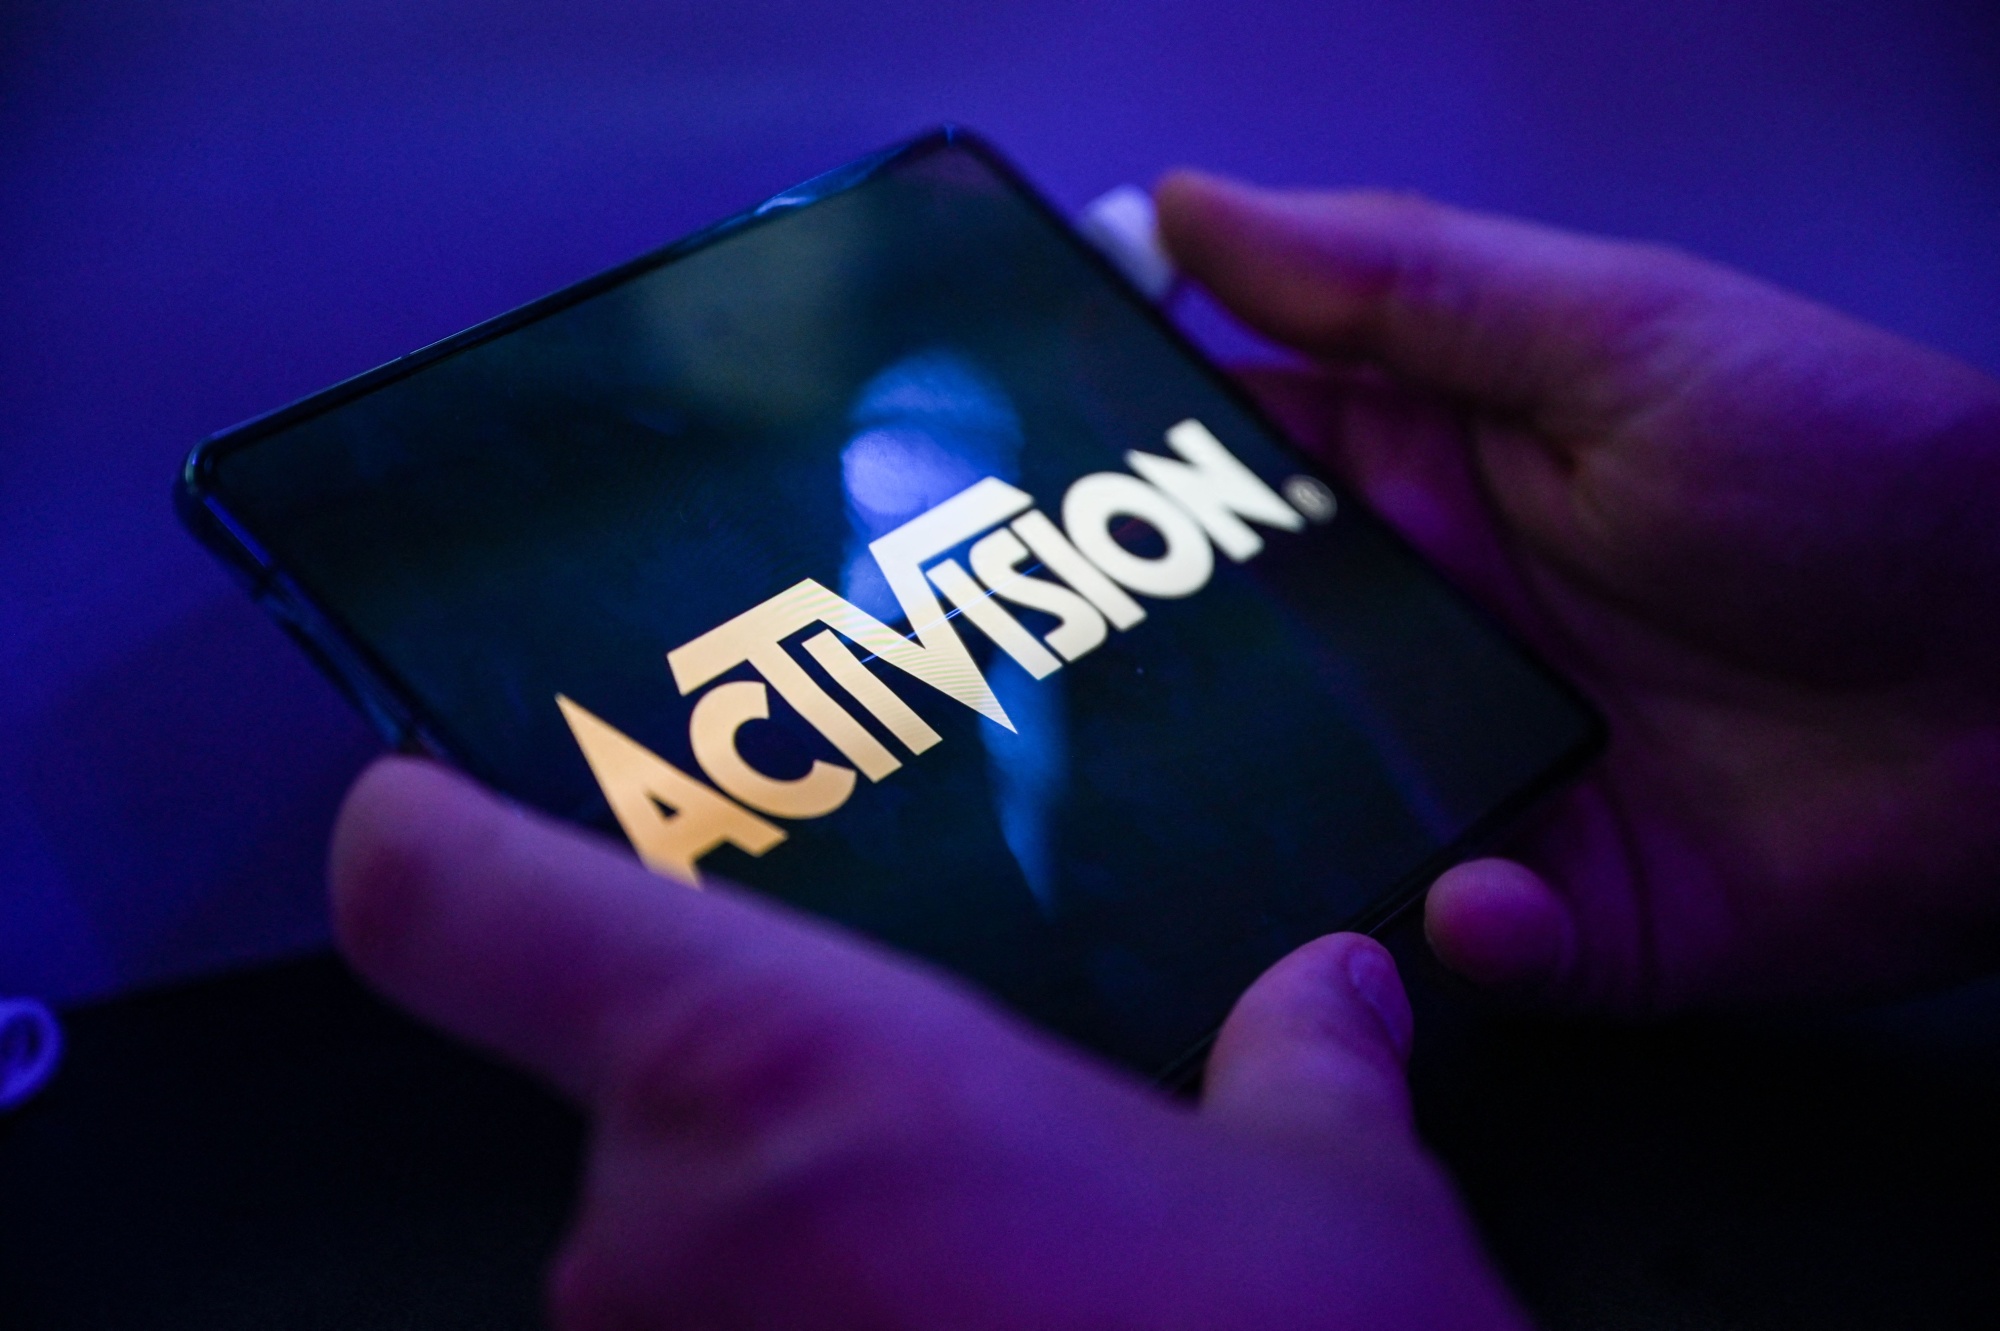 Microsoft Activision Deal Blocked: What Happens Now?